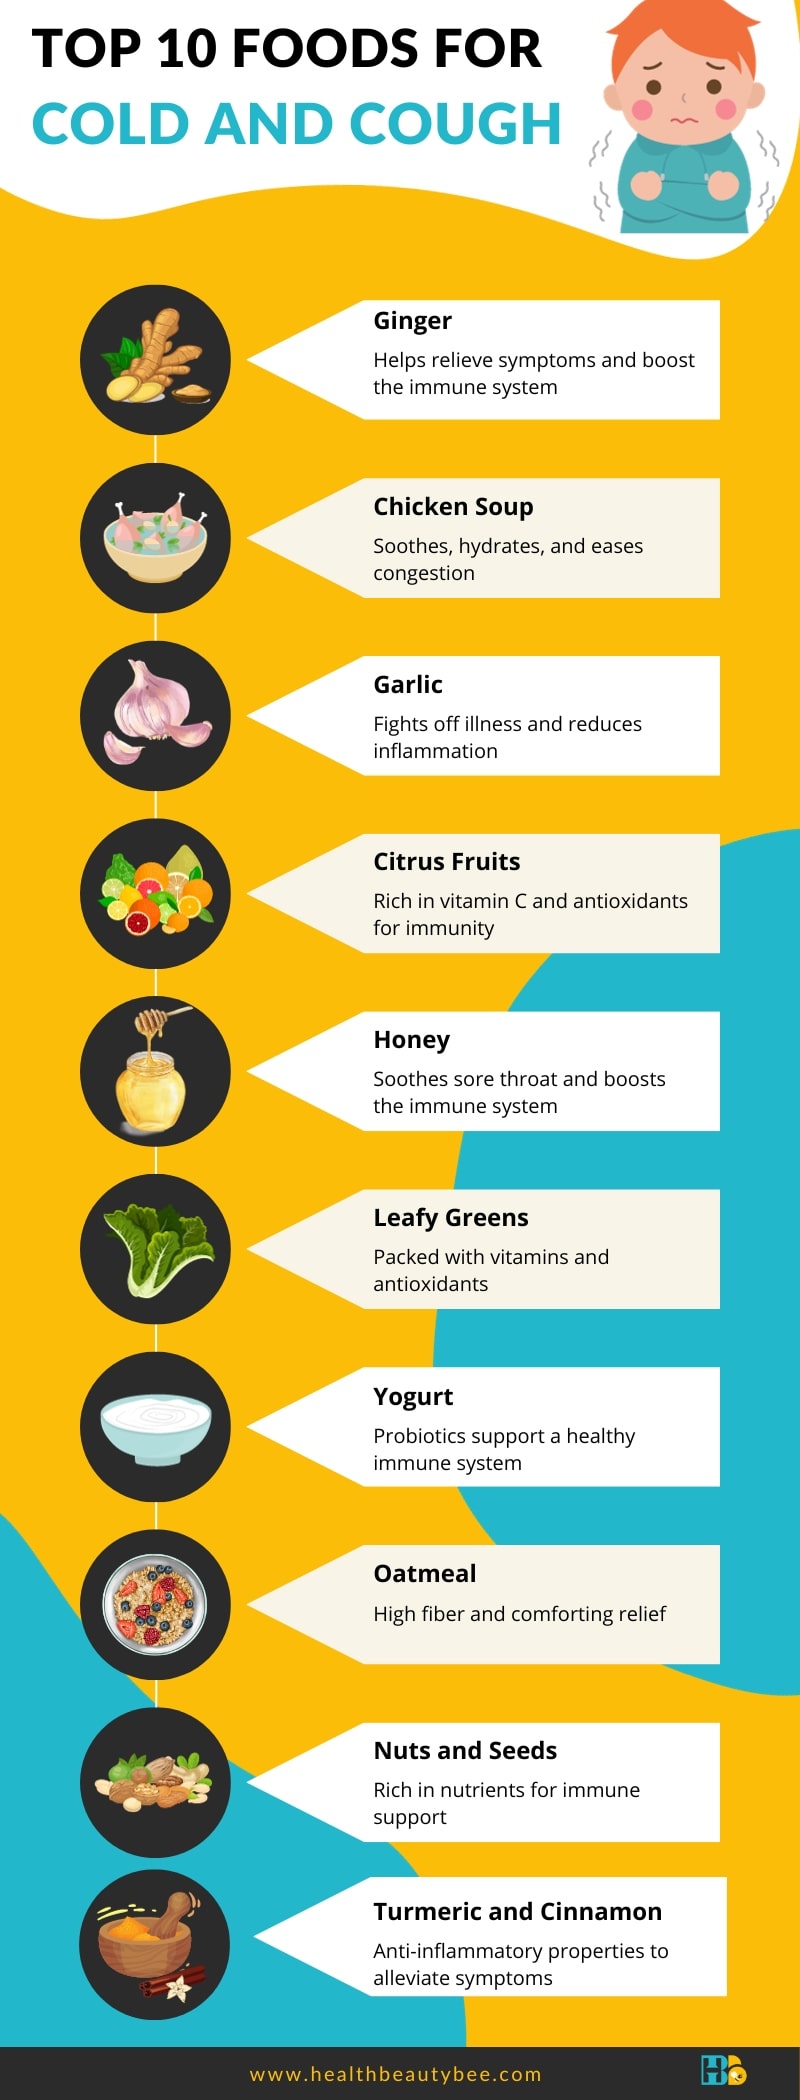 top foods for cold and cough healthbeautybee